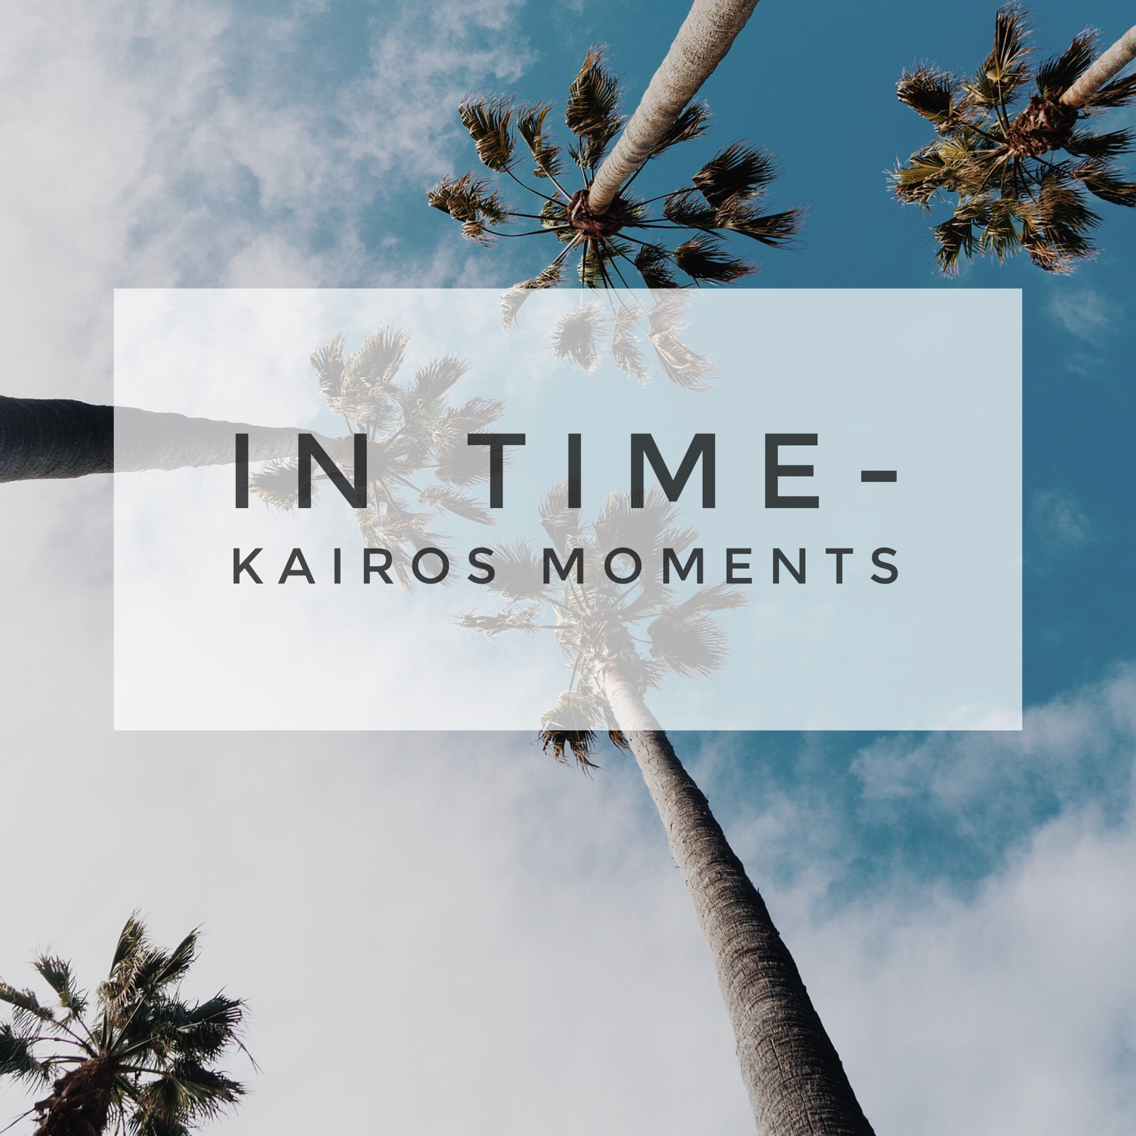 In Time - Kairos Moments